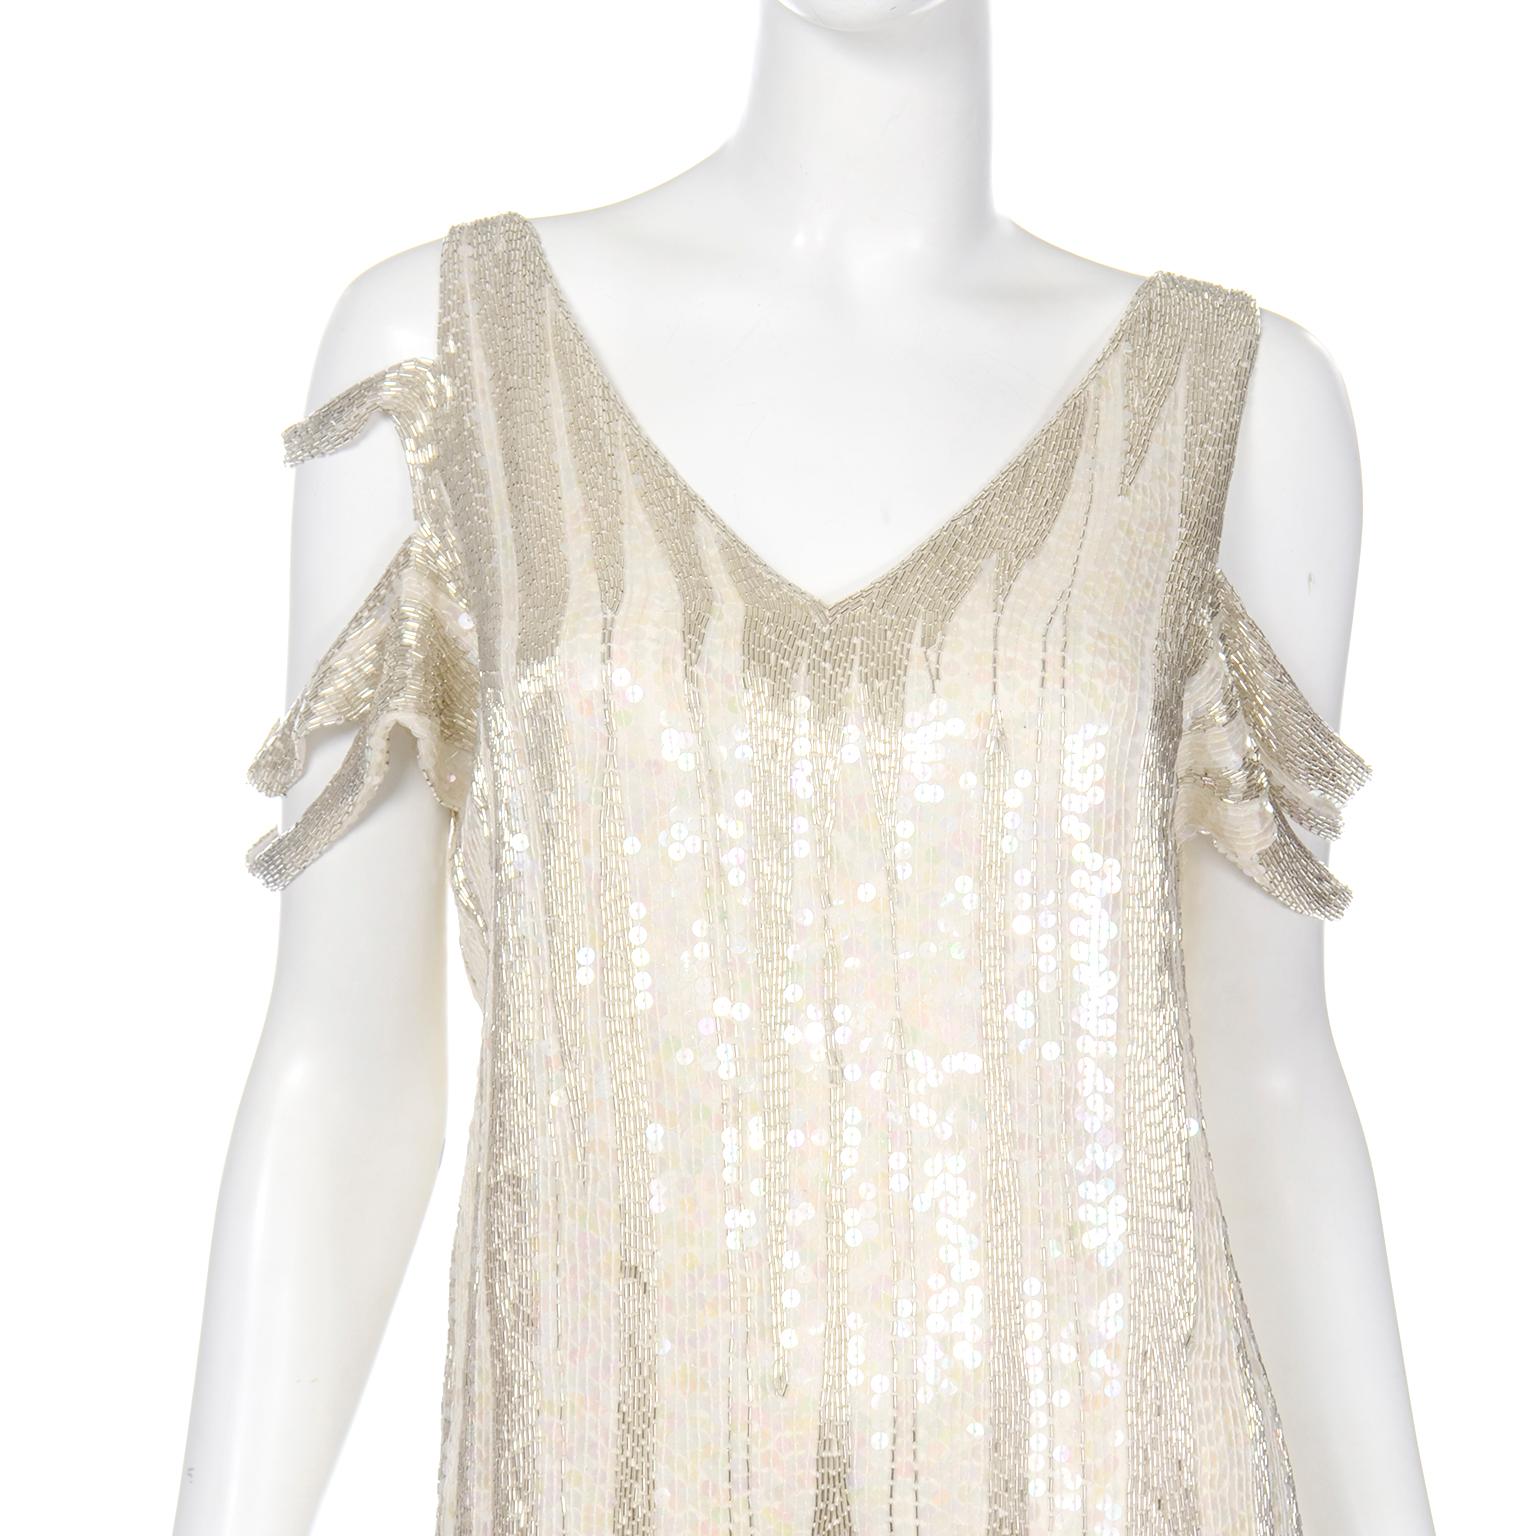 20s Inspired White & Silver Beaded Flapper Style Evening Dress w Beads & Sequins 1